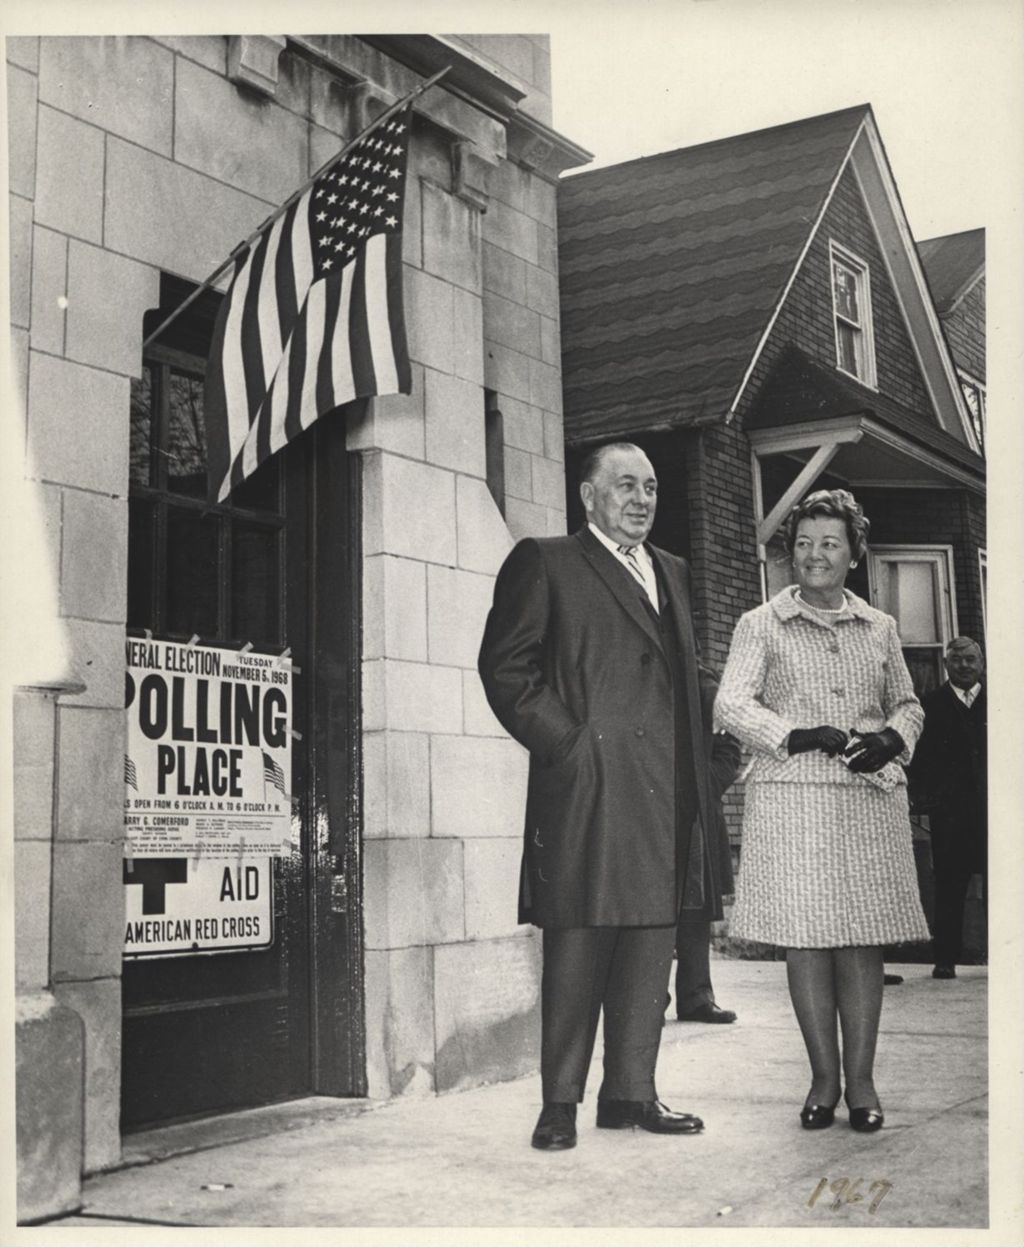 Miniature of Daleys standing outside their polling place